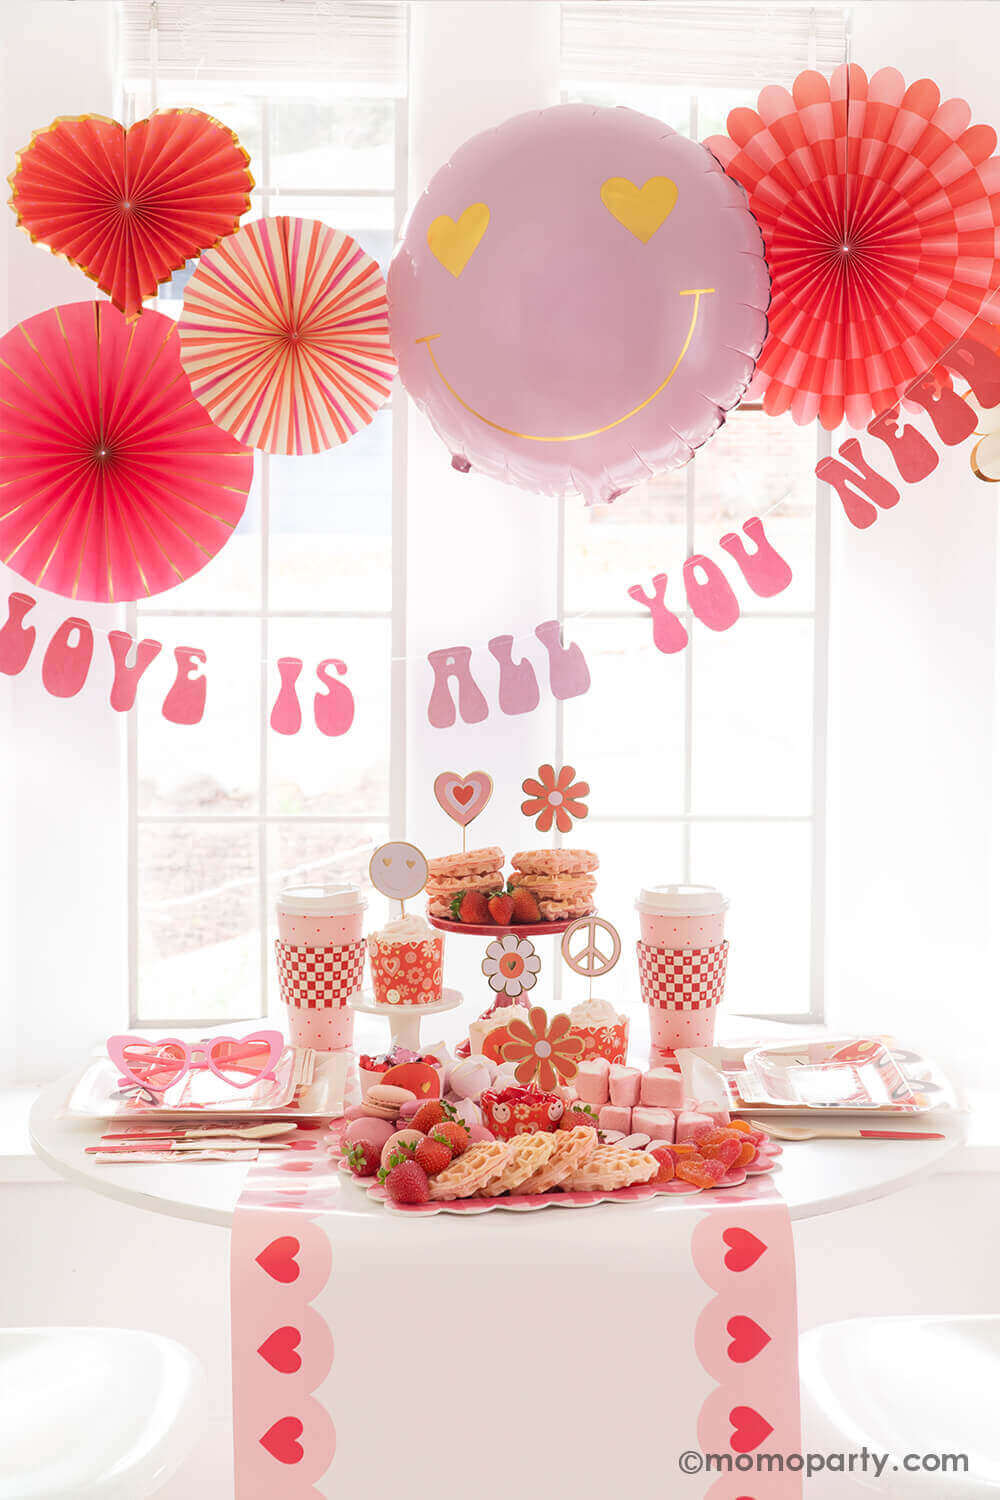 A Valentine's Day celebration featuring Momo Party's Groovy Valentine's Day Party box set up with pink and red paper fans in heart shape and a "love is all you need" banner in retro type hung below the paper fans. On the table you can see a sweet board featuring treats and snacks in red and pink colors including heart shaped waffles, strawberries, macarons, marshmallows etc. Next to the desert board featured retro inspired Valentine's plates, party cups and napkins, a perfect inspo for Vday celebration!